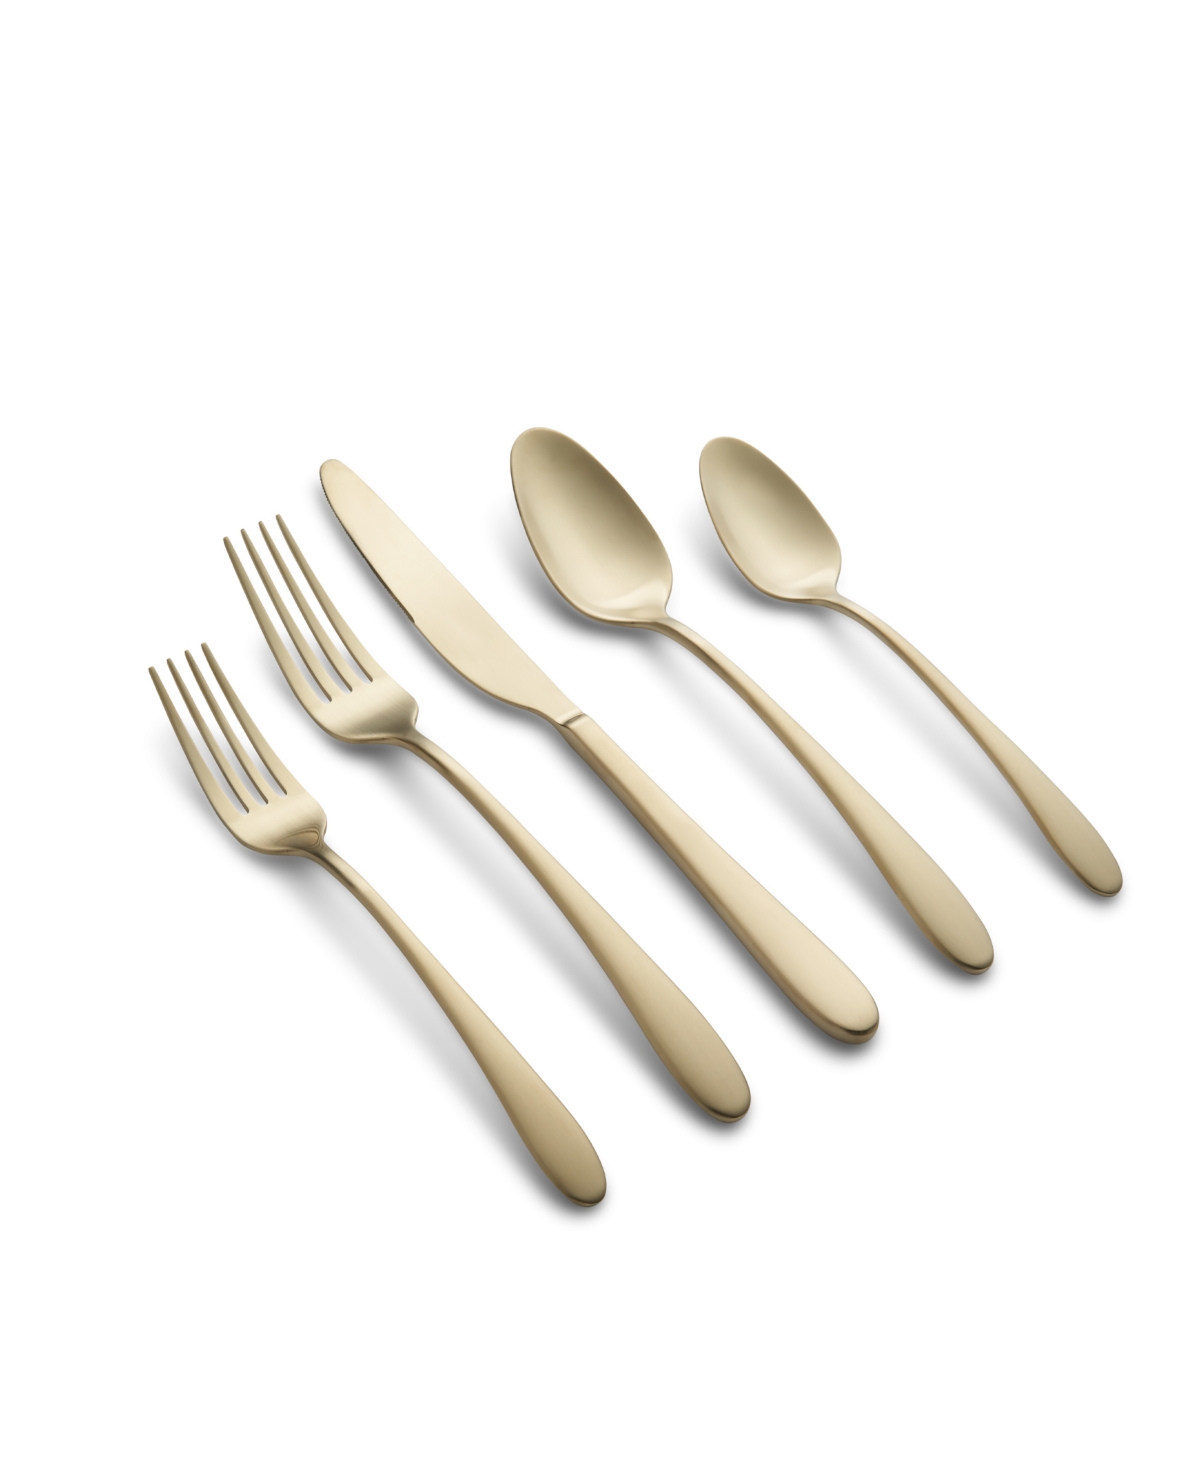 Cambridge Silversmiths Poet Champagne Satin 20 Piece 18/10 Stainless Steel Flatware Set, Service for 4